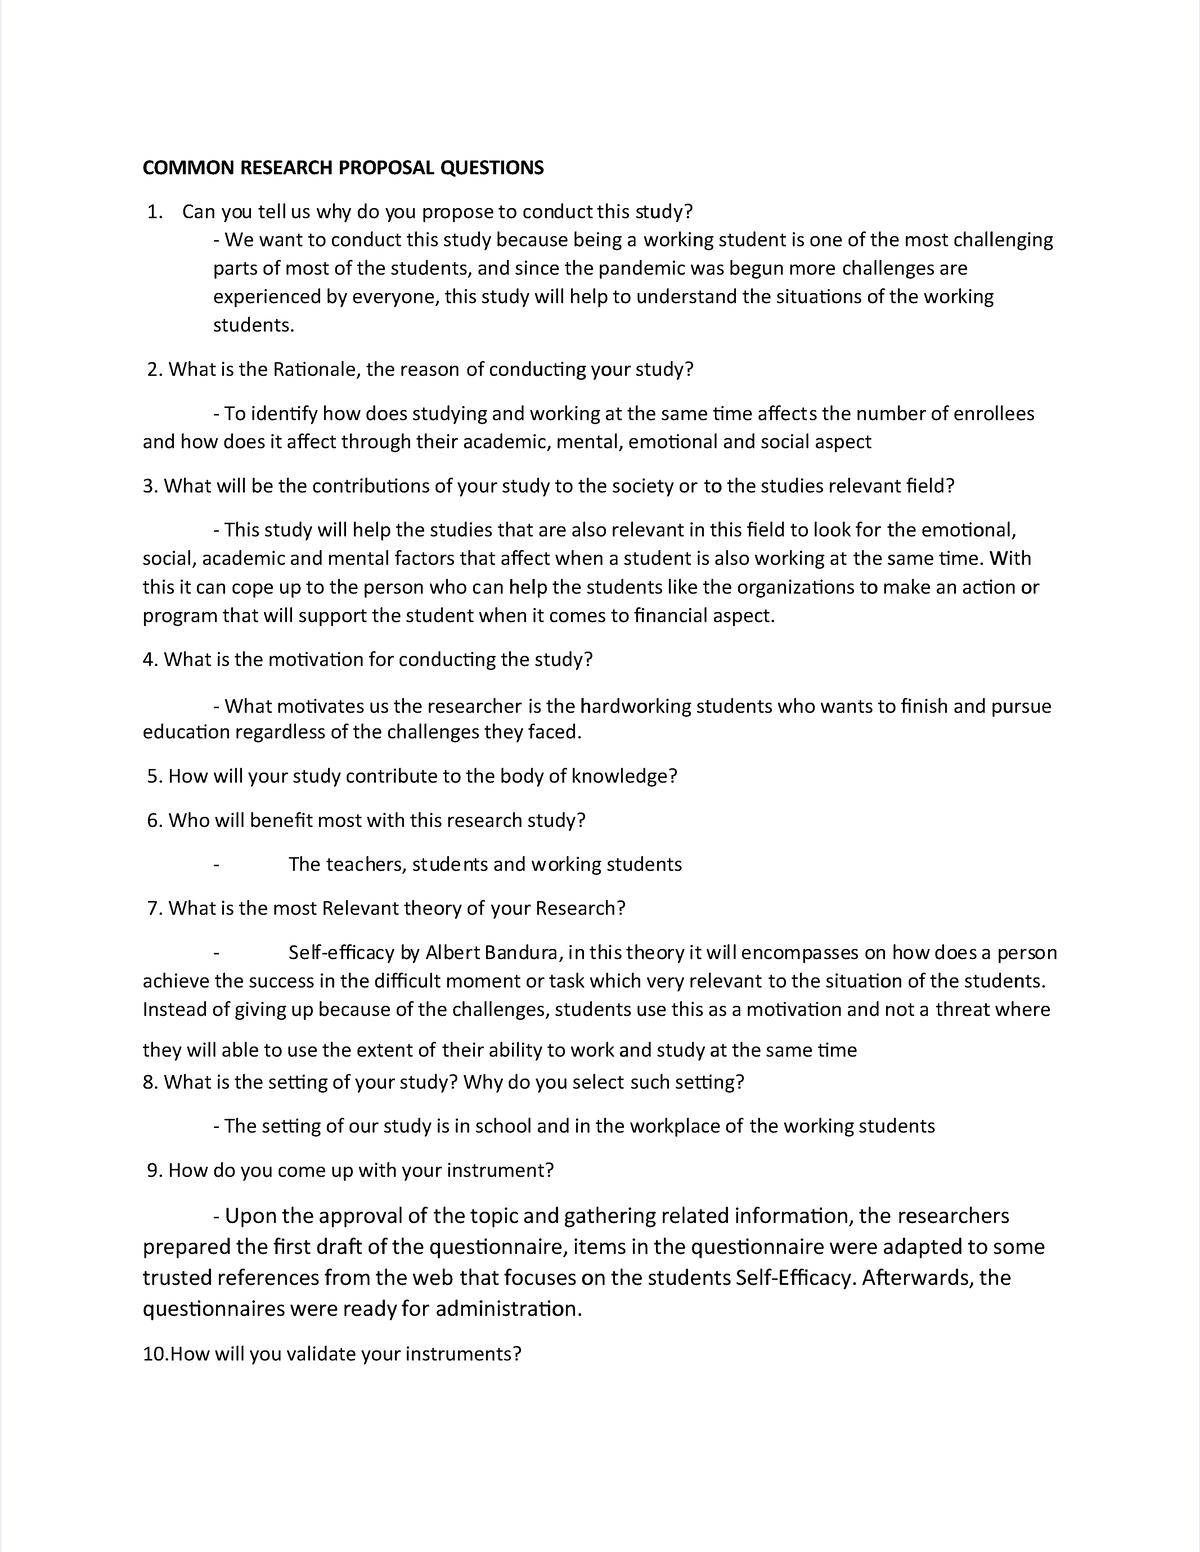 research proposal questions and answers pdf